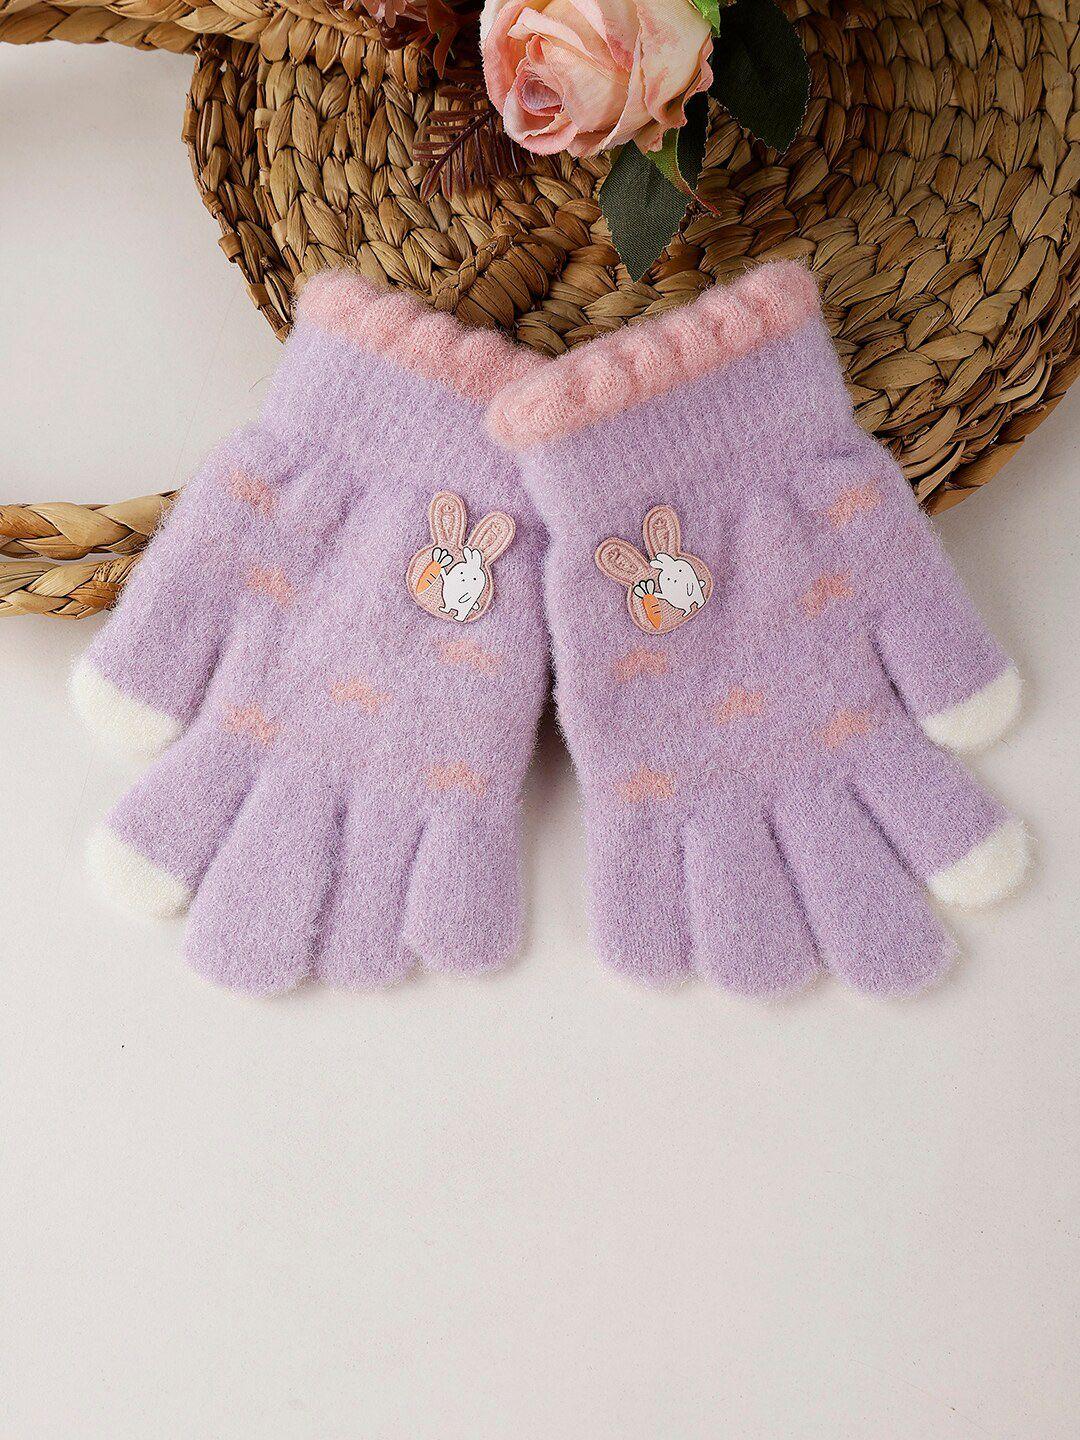 passion petals girls self design acrylic gloves with rabbit applique